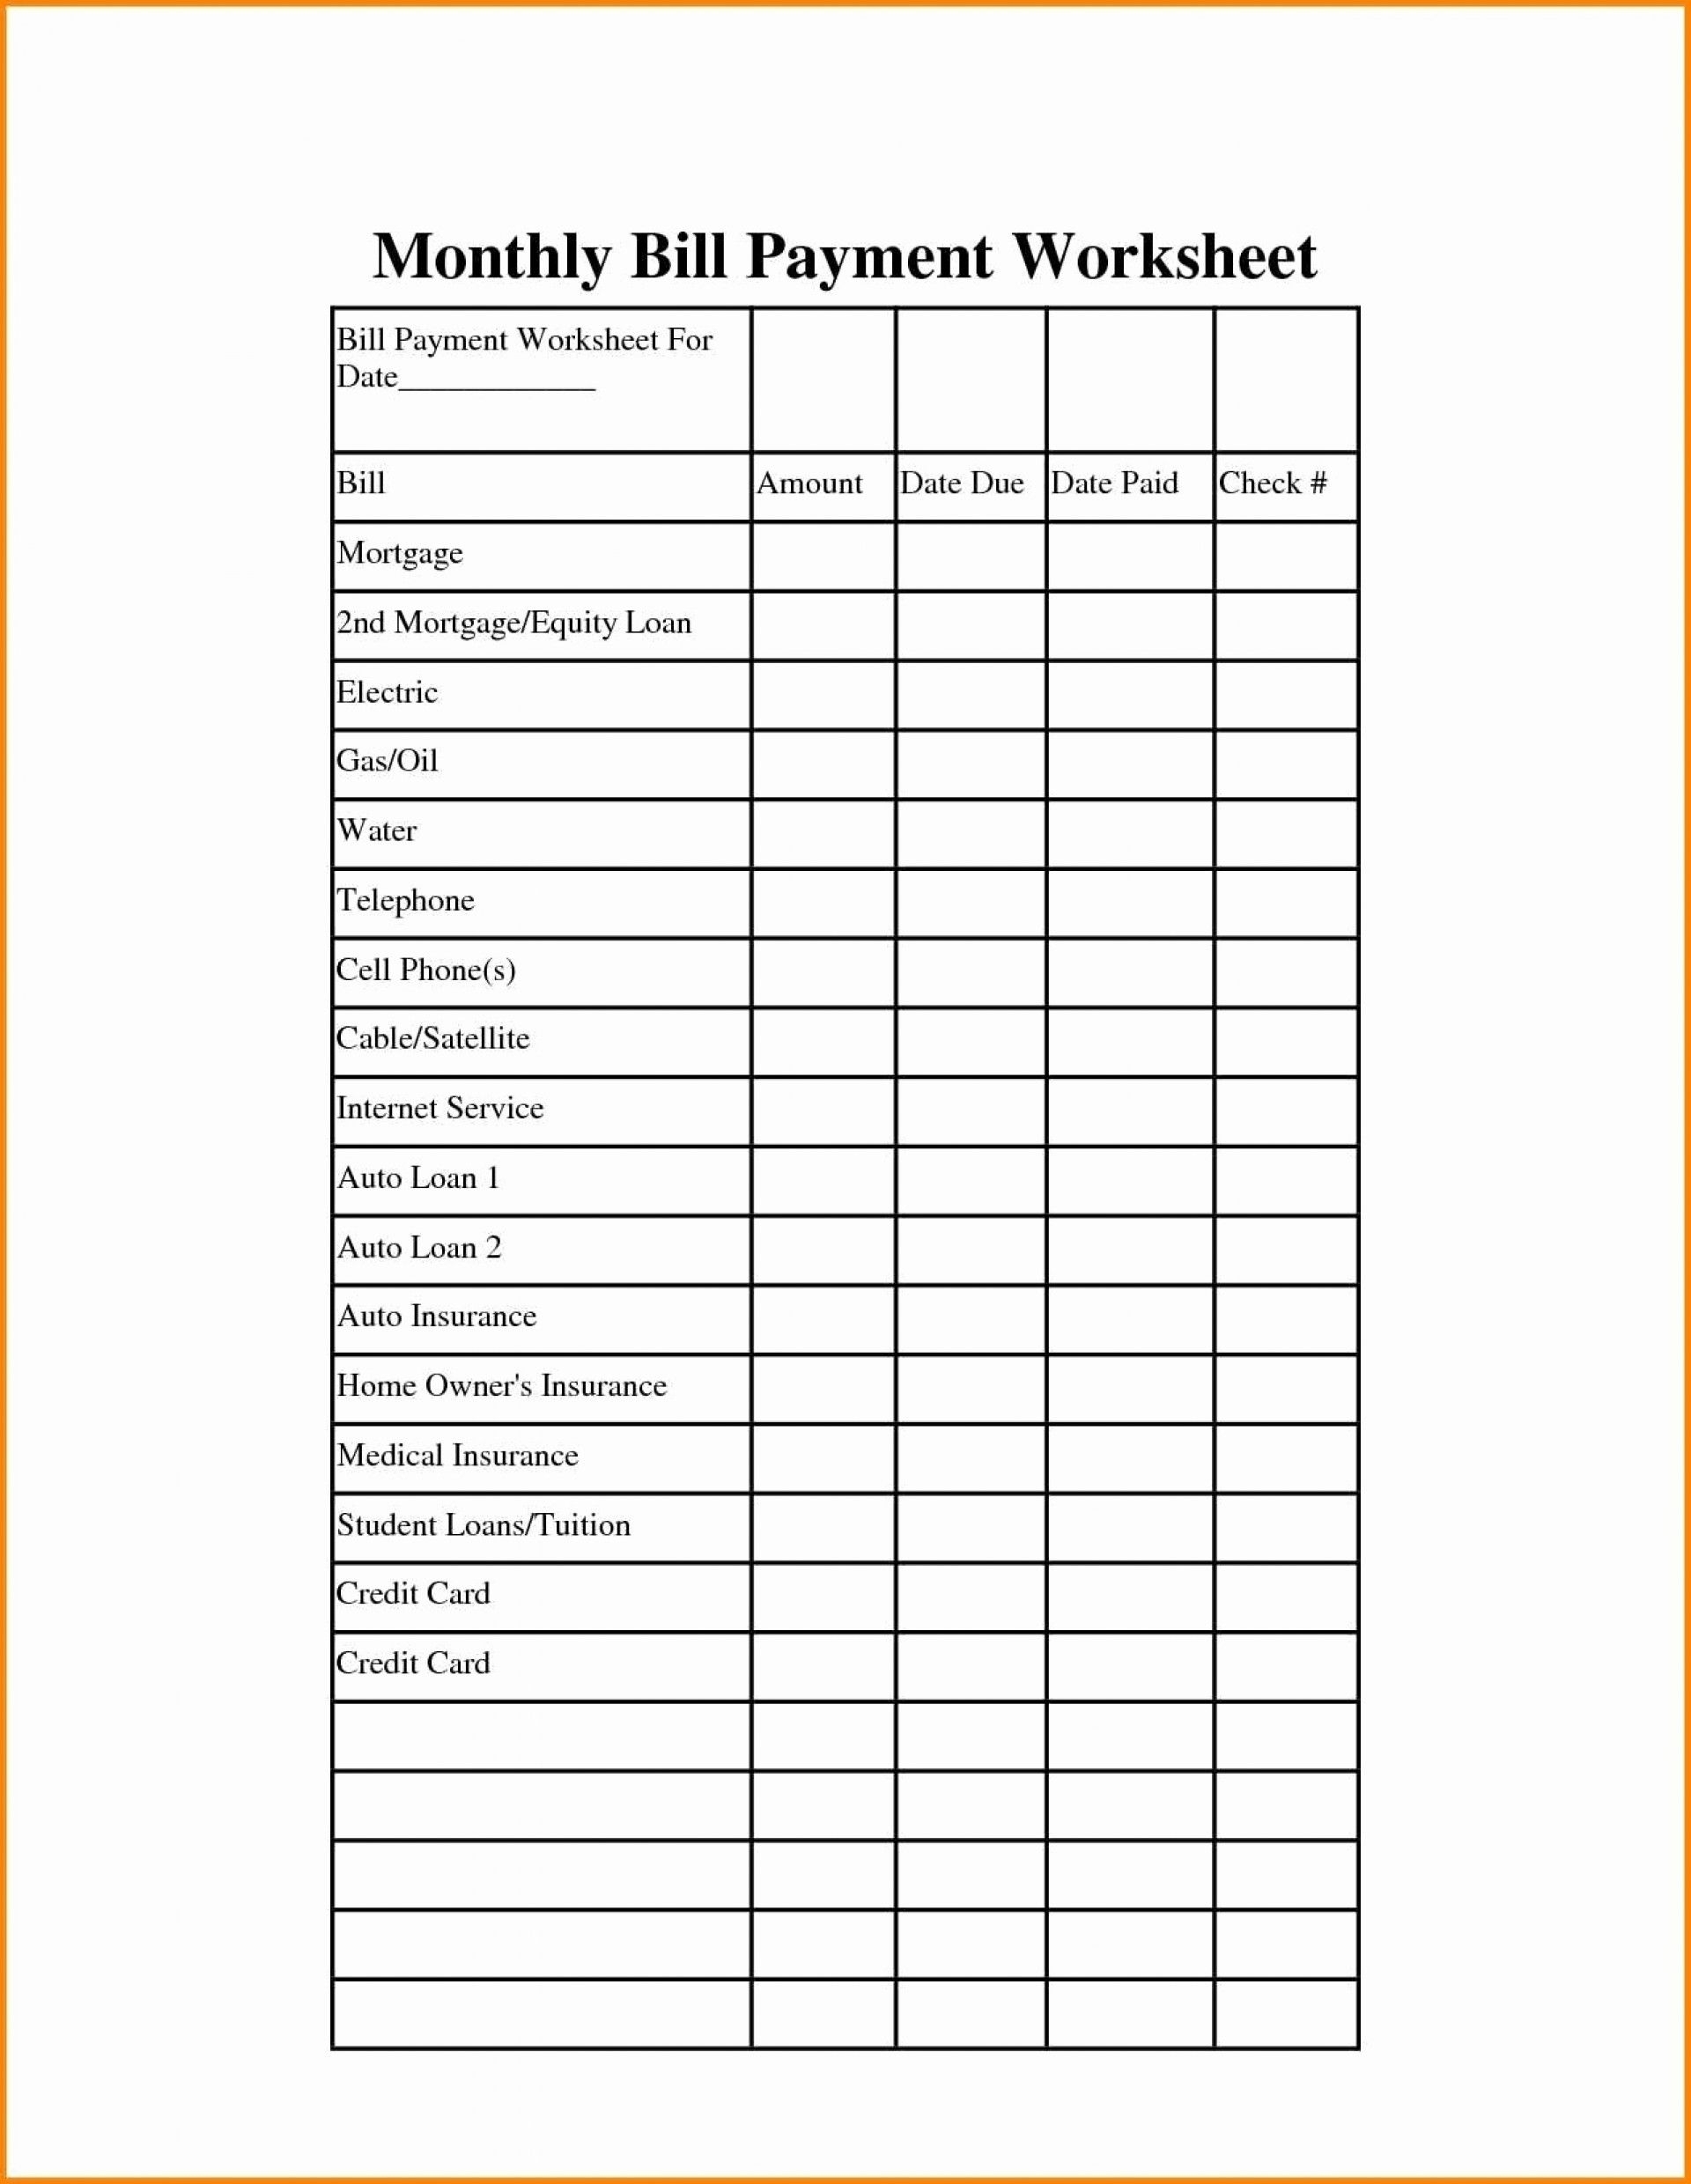 Get Weekly Payments Worksheets